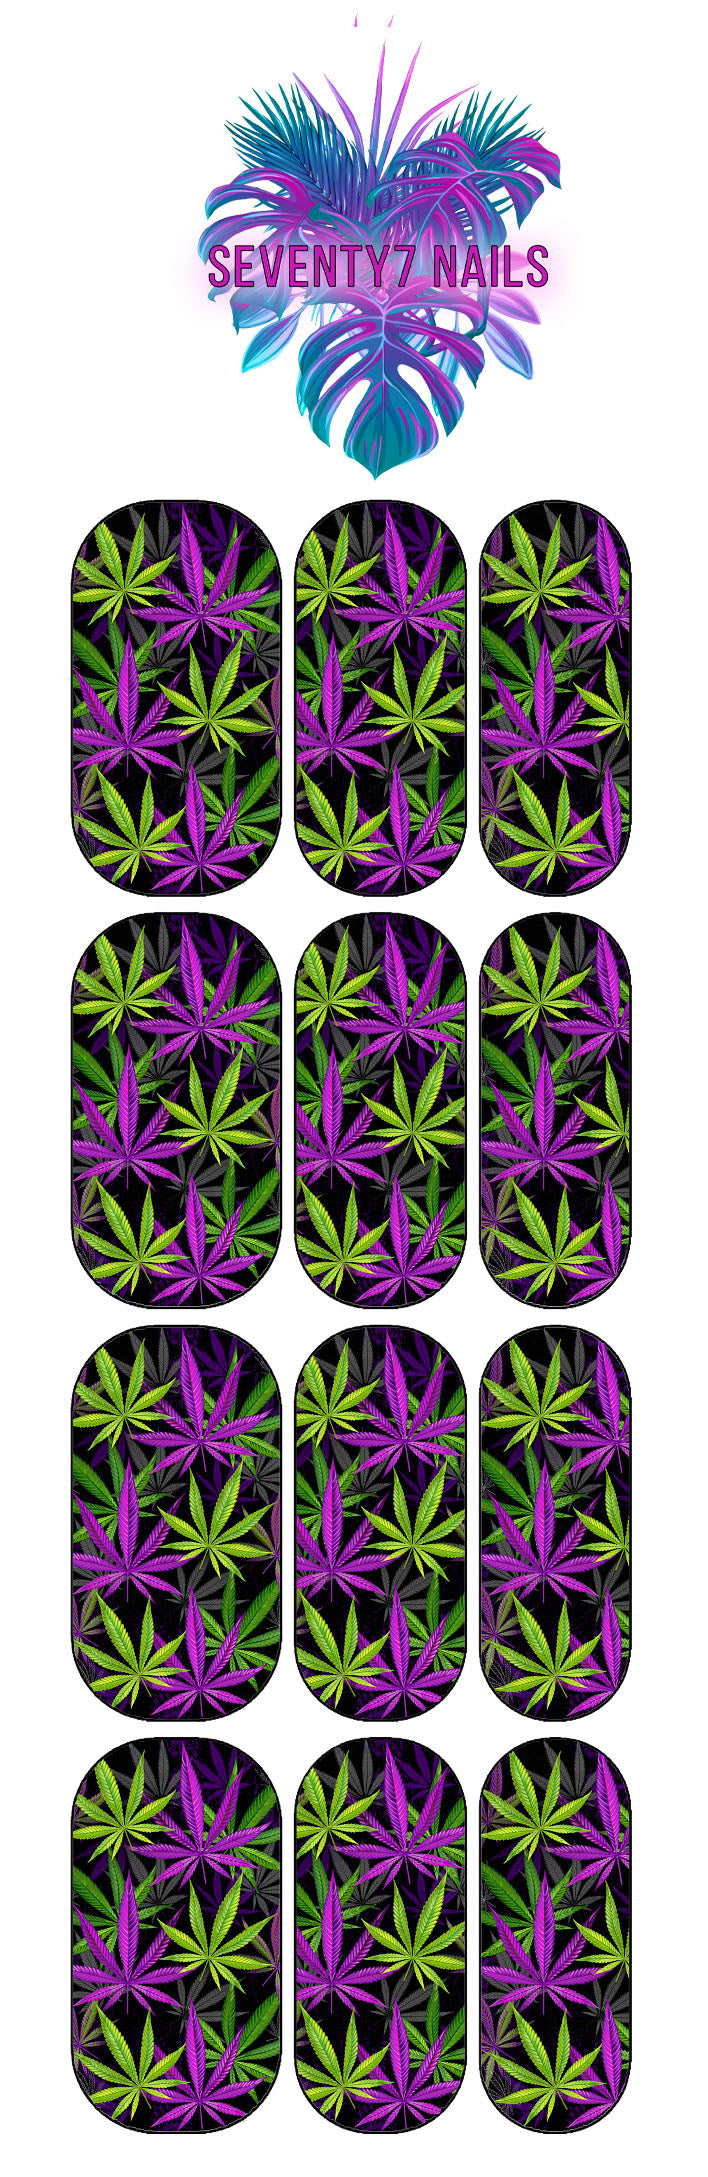 Waterslide Nail Decals - Mary Jane